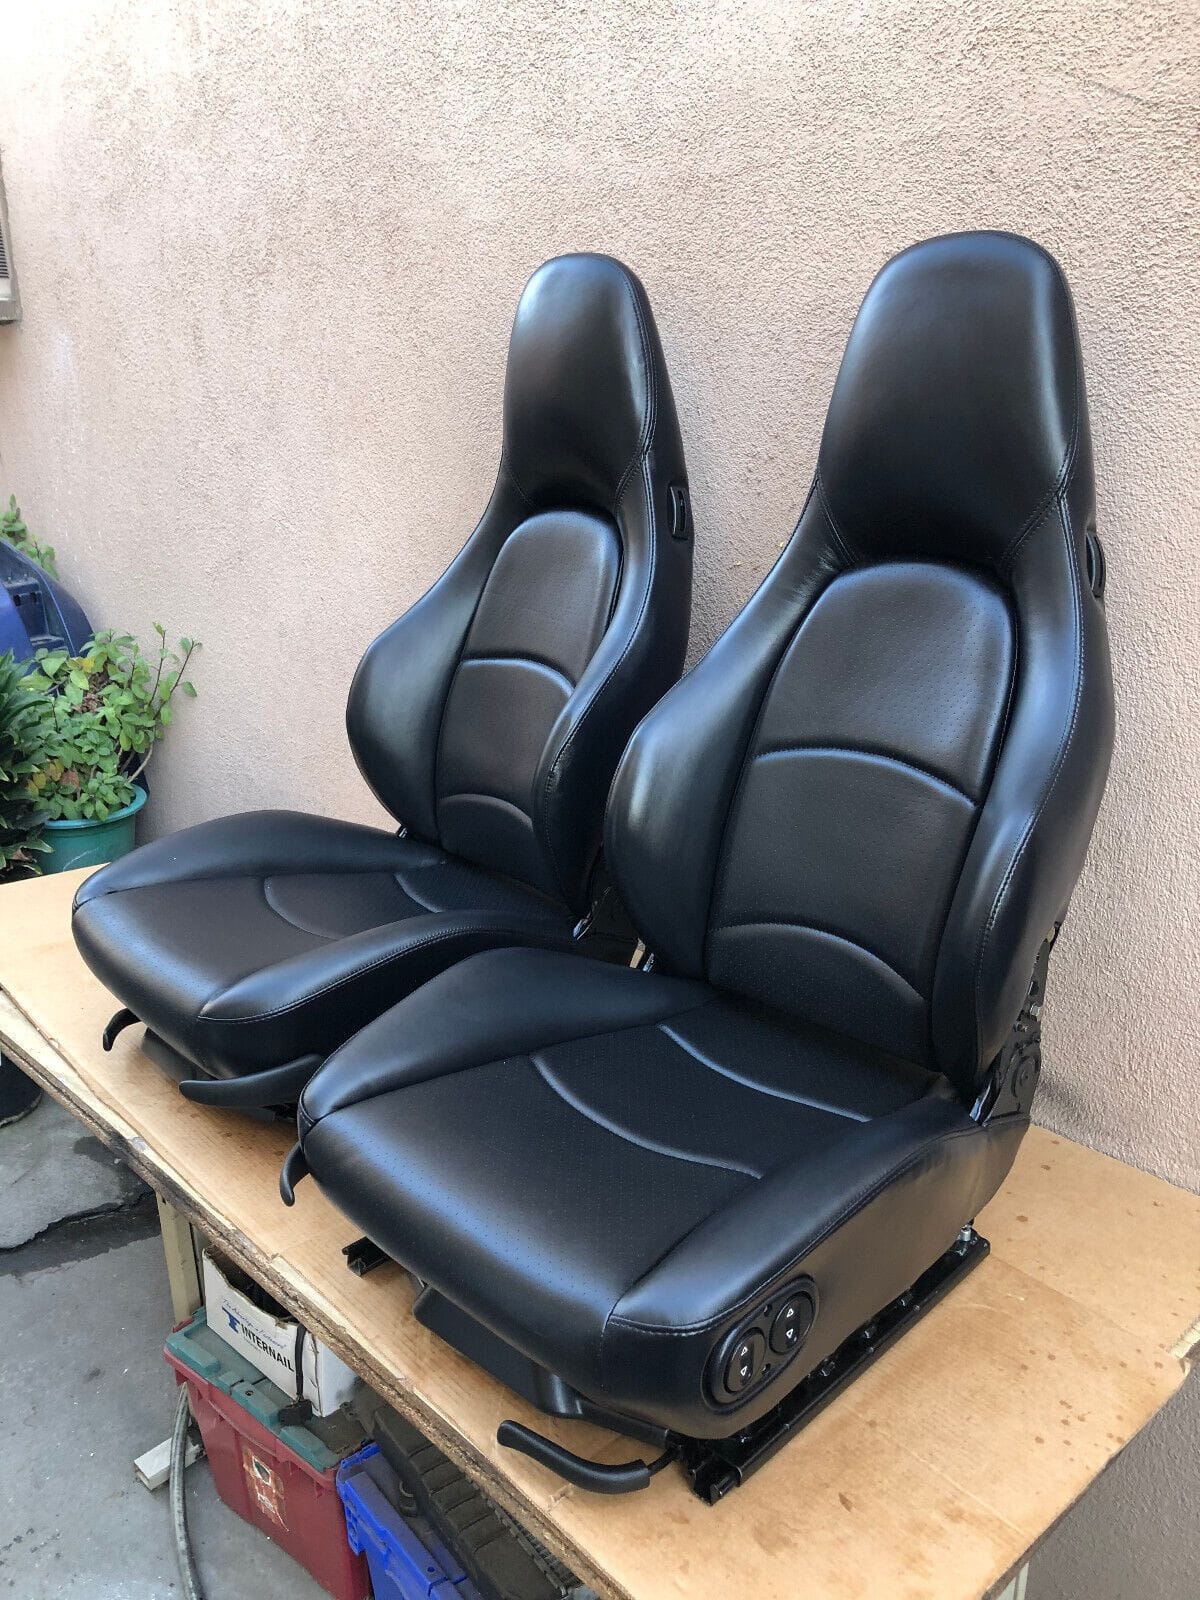 Interior/Upholstery - Porsche 993 Recaro OEM Softback Sport Seats - New - All Years  All Models - South Gate, CA 90280, United States